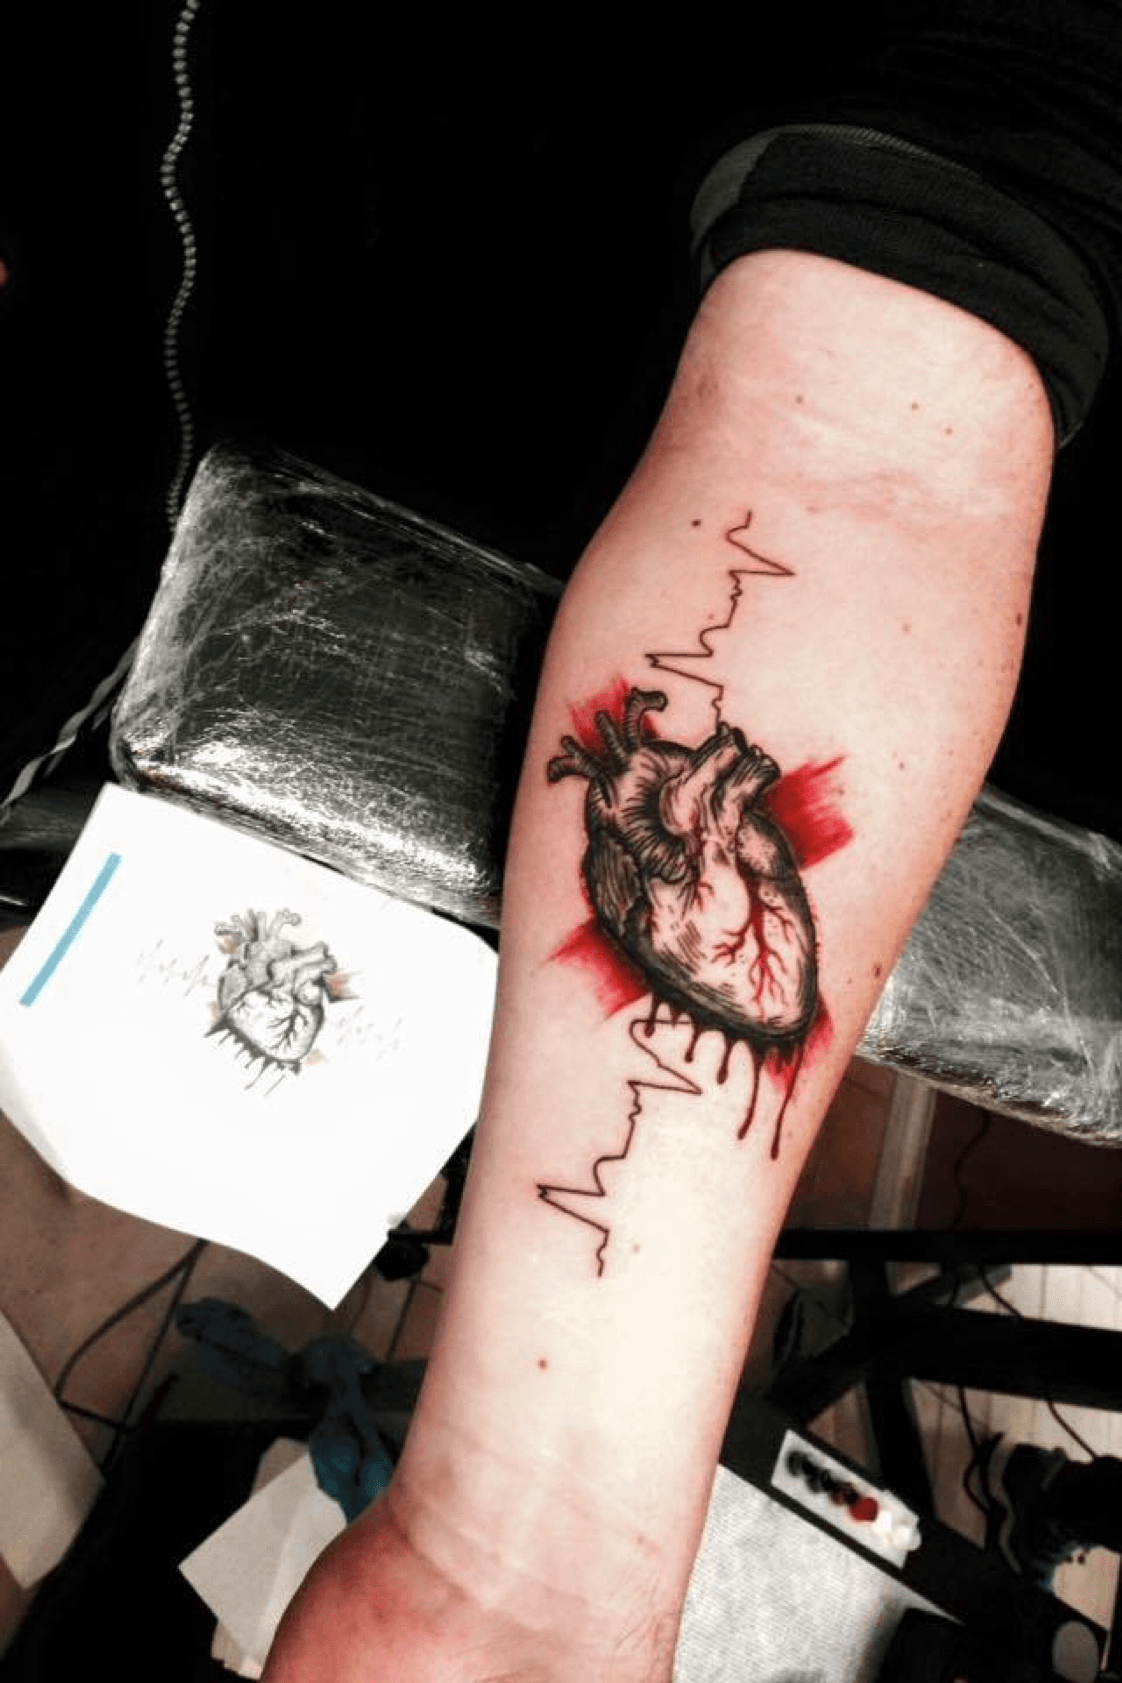 Tattoo uploaded by Pablo Cantariño • my father's heart attack • Tattoodo